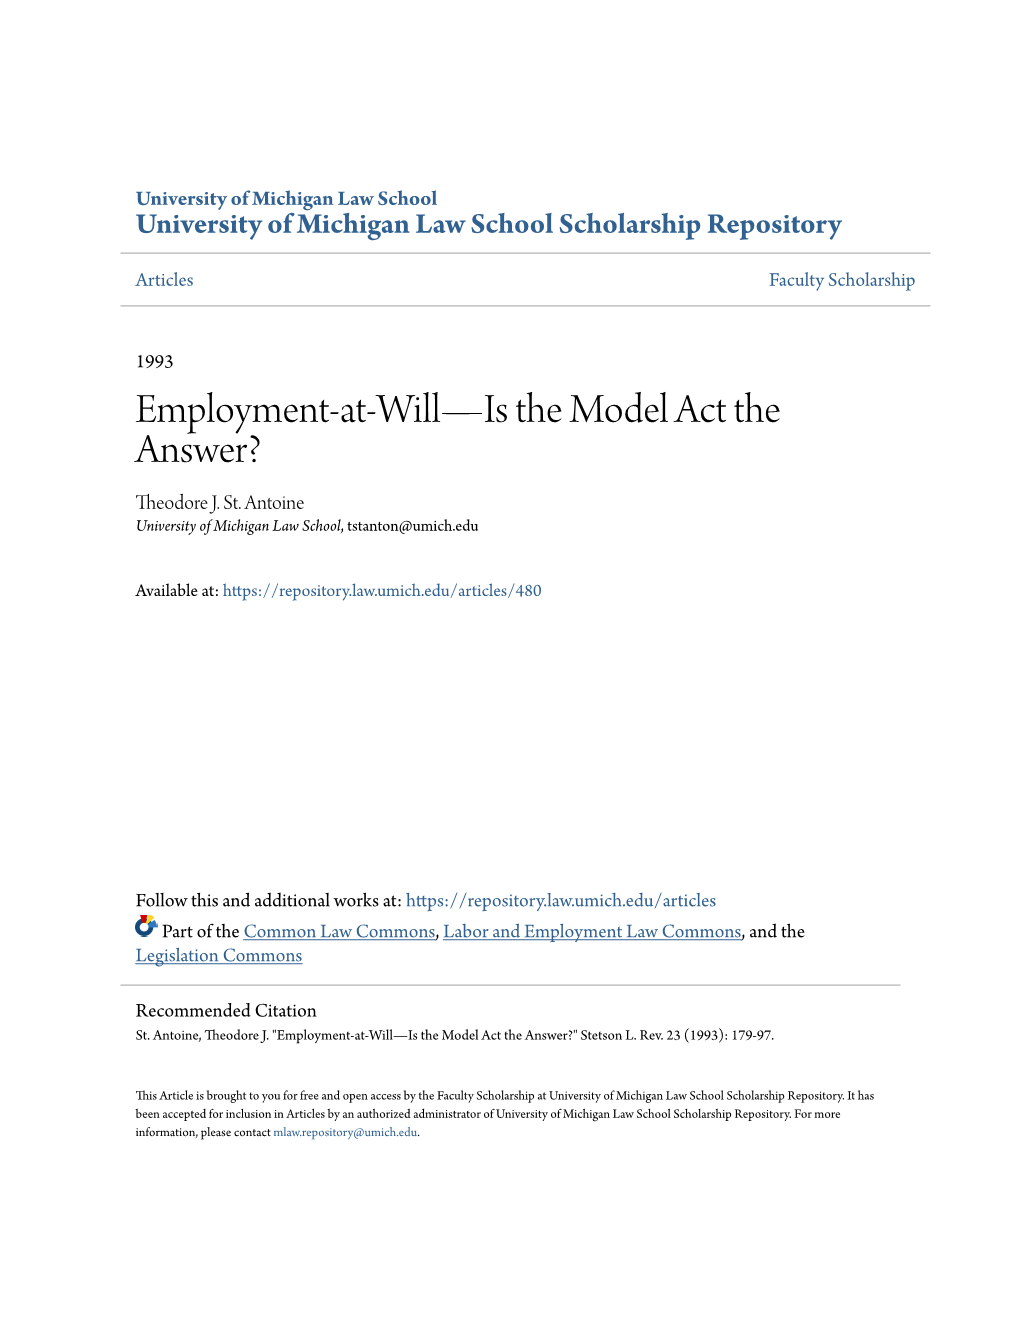 Employment-At-Will—Is the Model Act the Answer? Theodore J